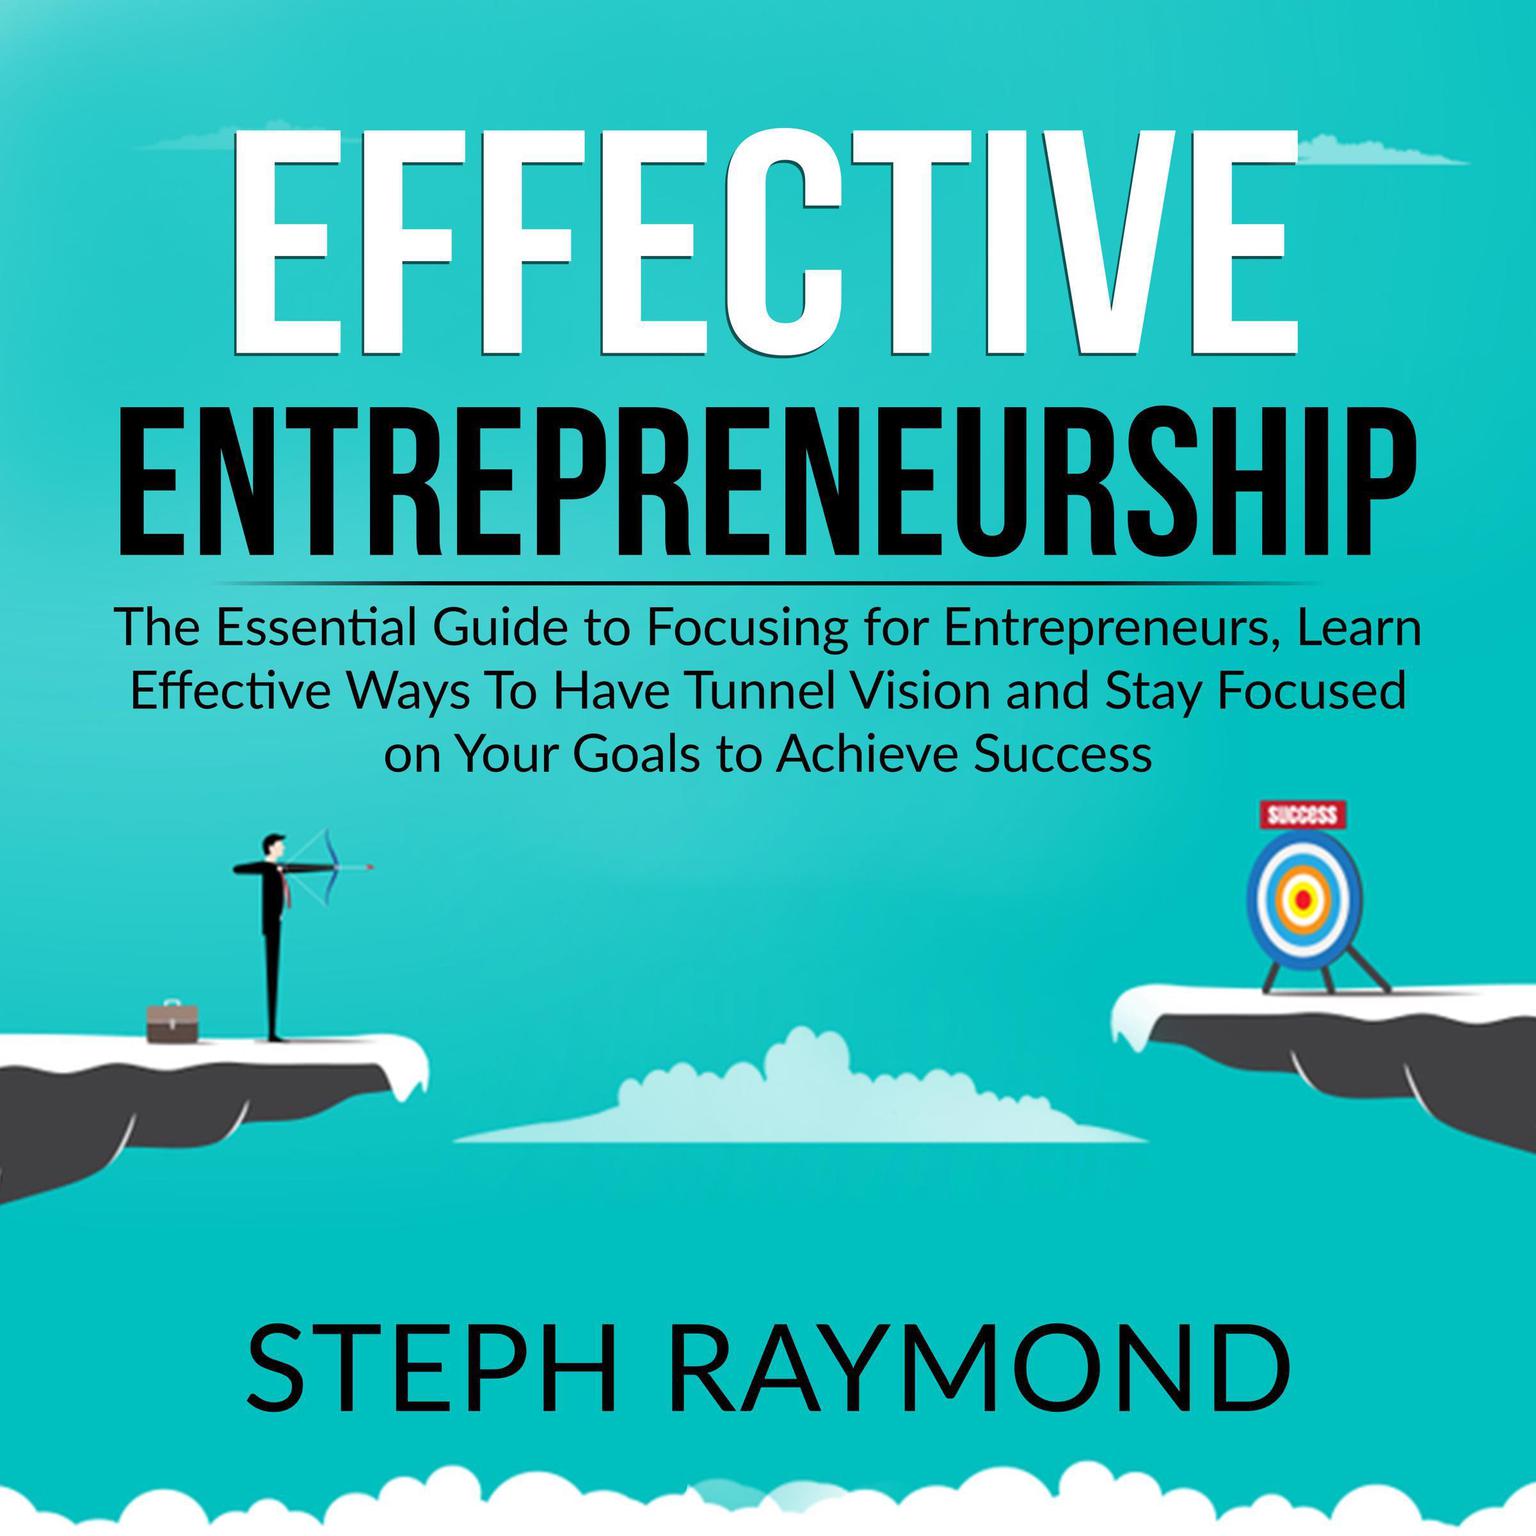 Effective Entrepreneurship: : The Essential Guide to Focusing for Entrepreneurs, Learn Effective Ways To Have Tunnel Vision and Stay Focused on Your Goals to Achieve Success Audiobook, by Steph Raymond